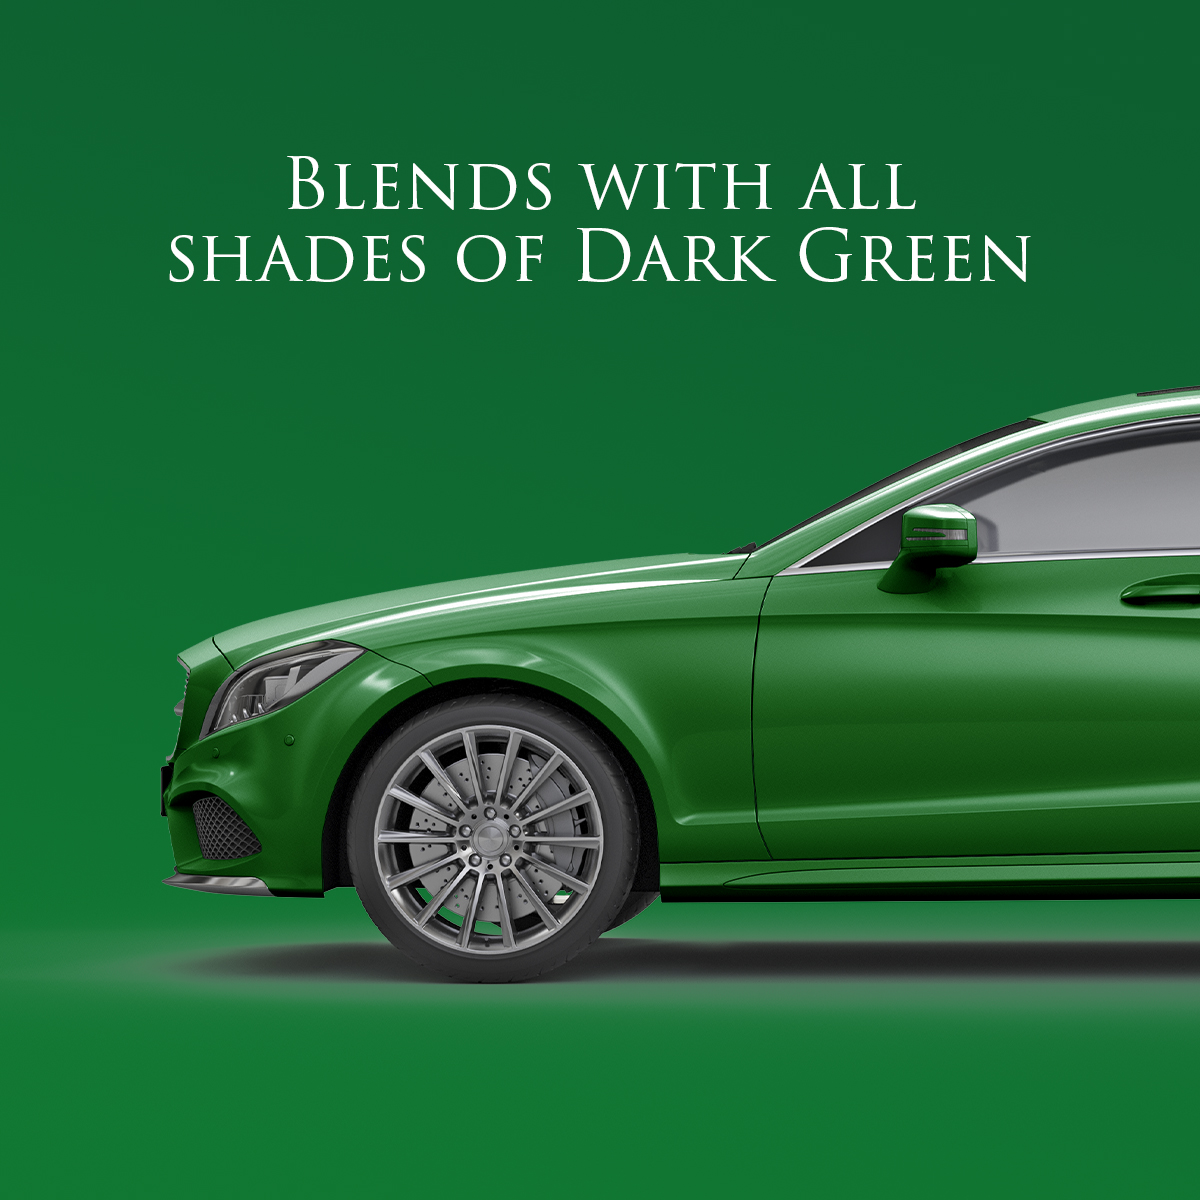 Blends with all shades of dark green